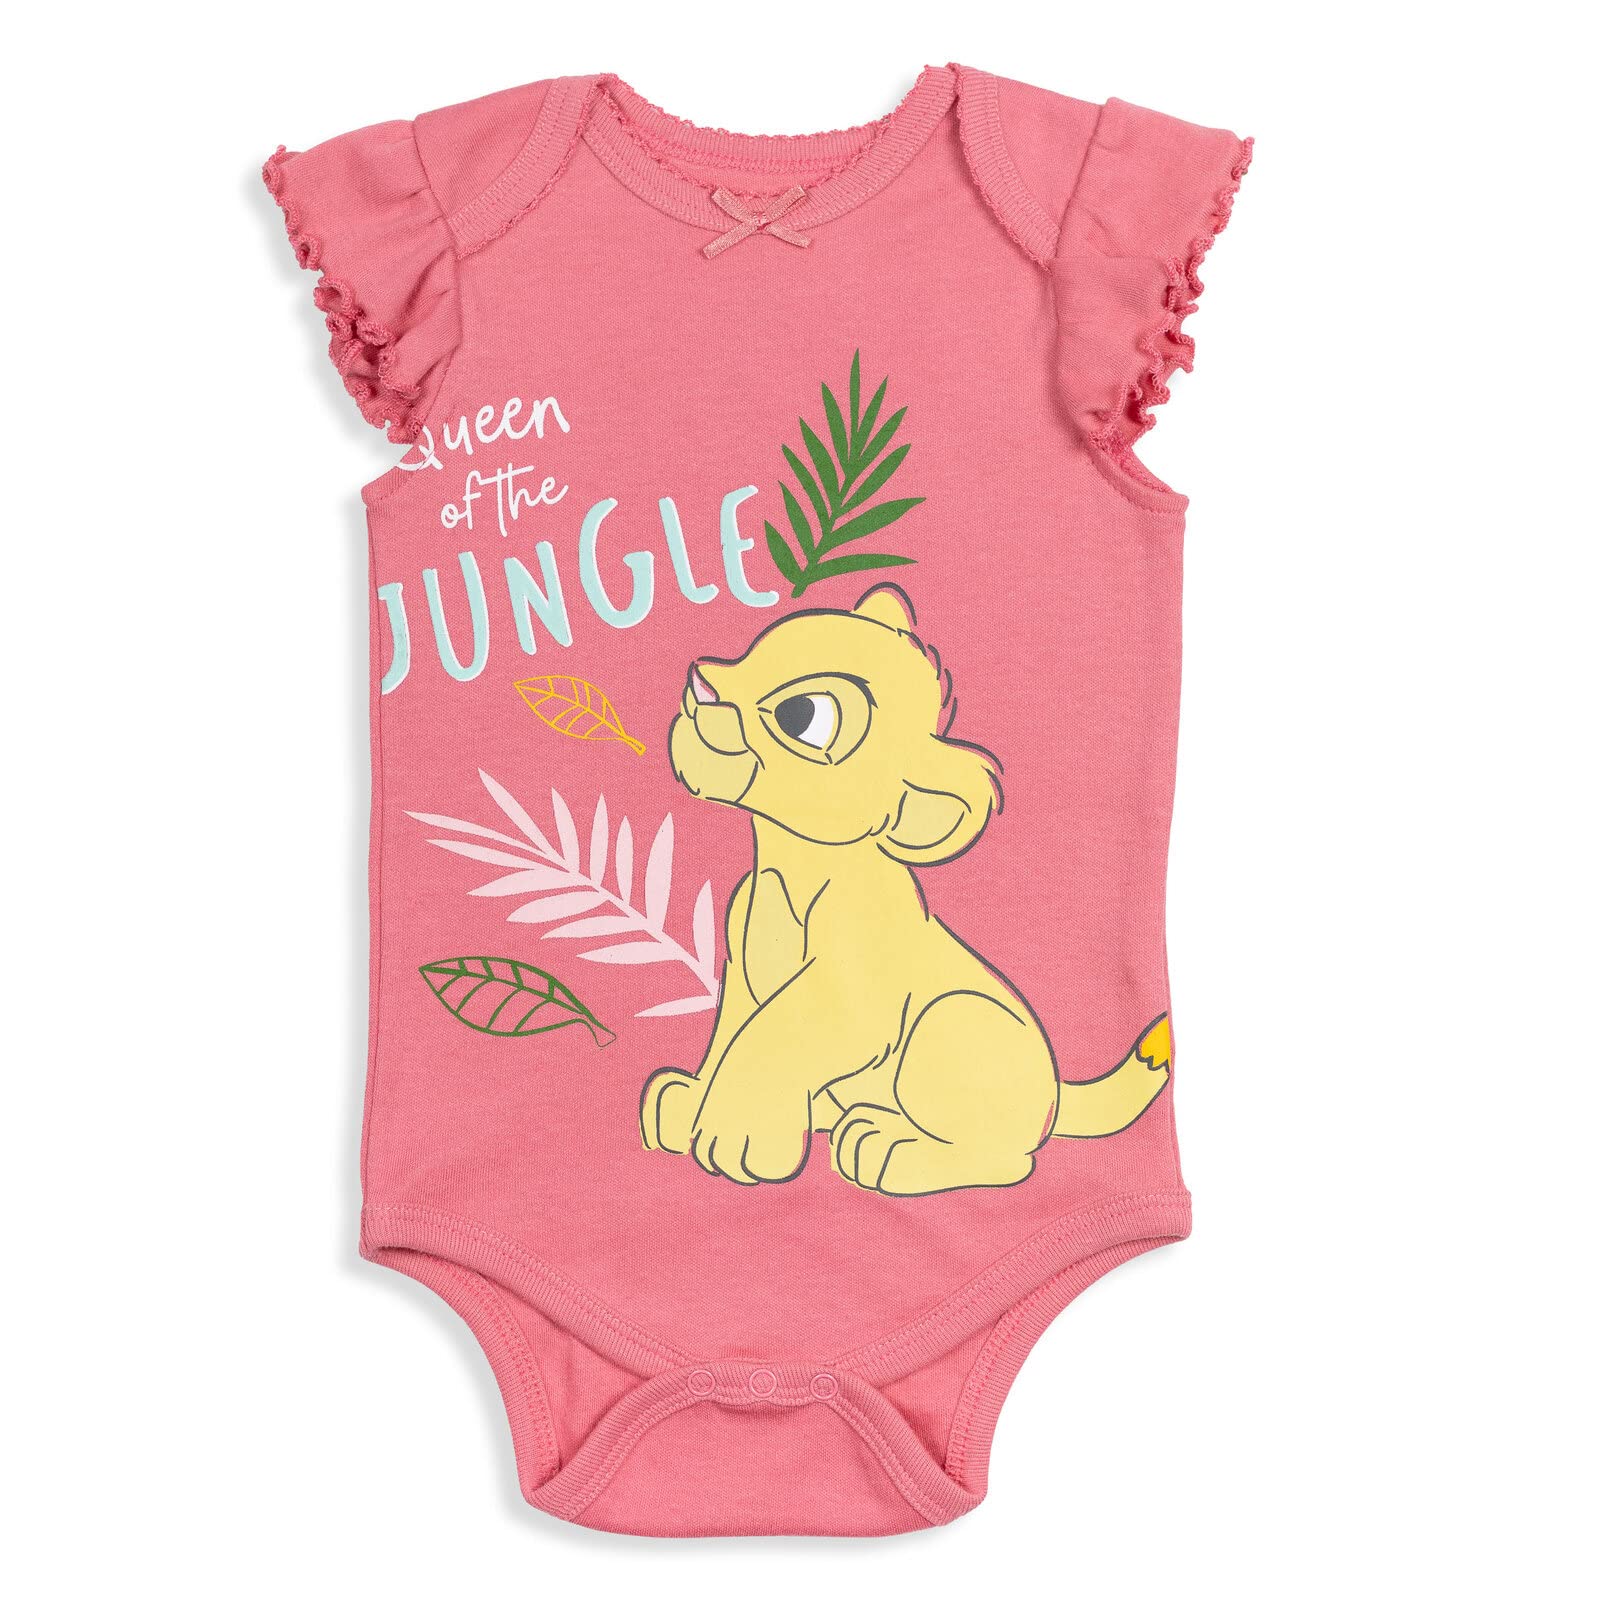 Disney Classics The Aristocats Lion King Winnie the Pooh Pixar Toy Story Baby Girls 5 Pack Bodysuits Newborn to Infant